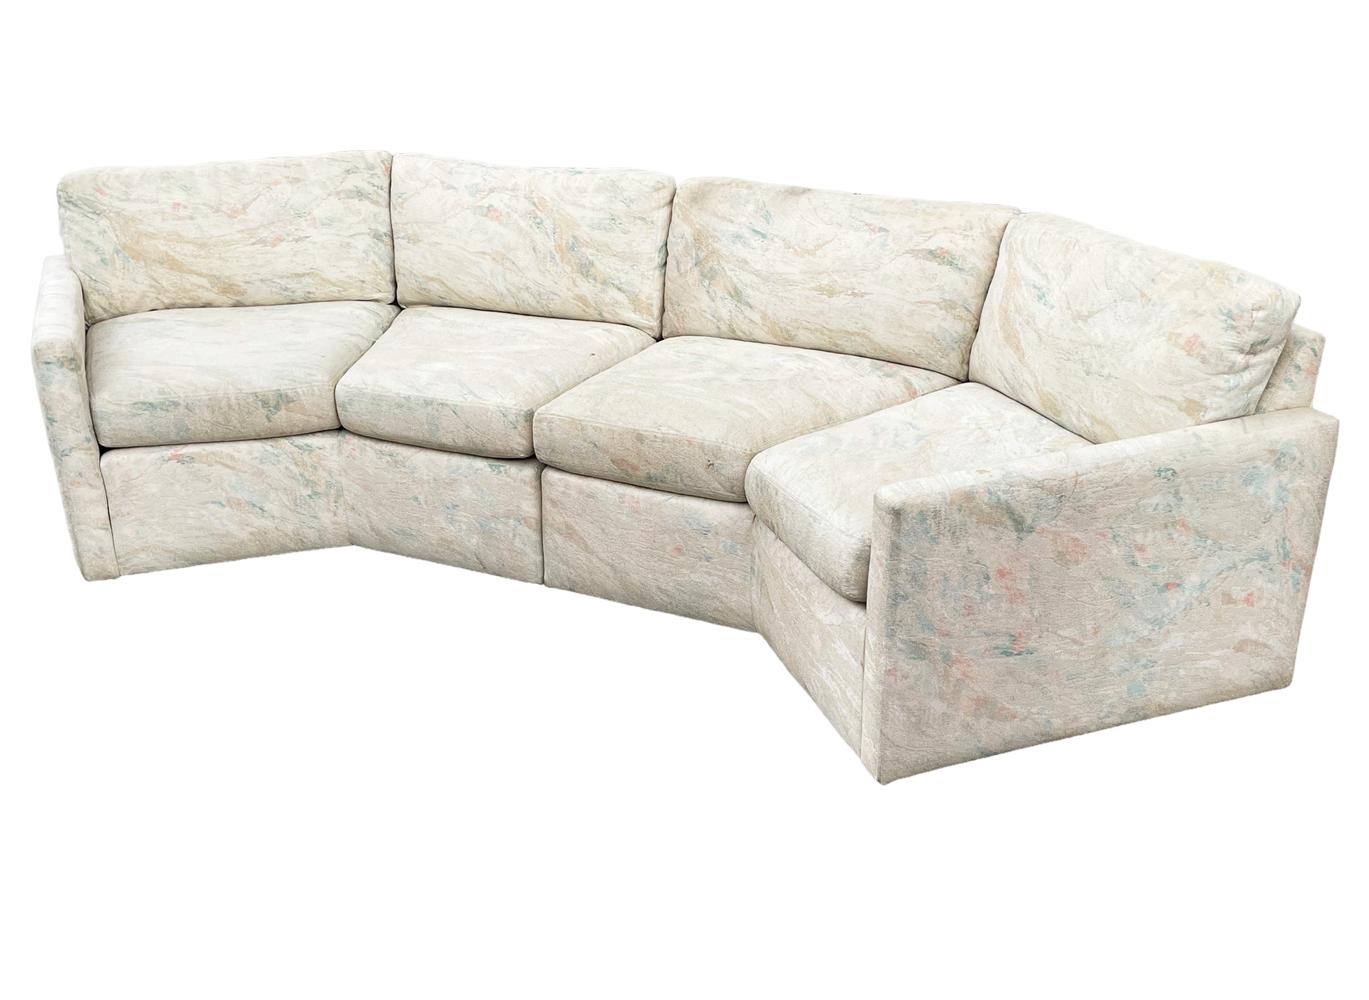 Fabric Vintage Mid-Century Modern Hexagonal Curved Sectional Sofa after Harvey Probber For Sale